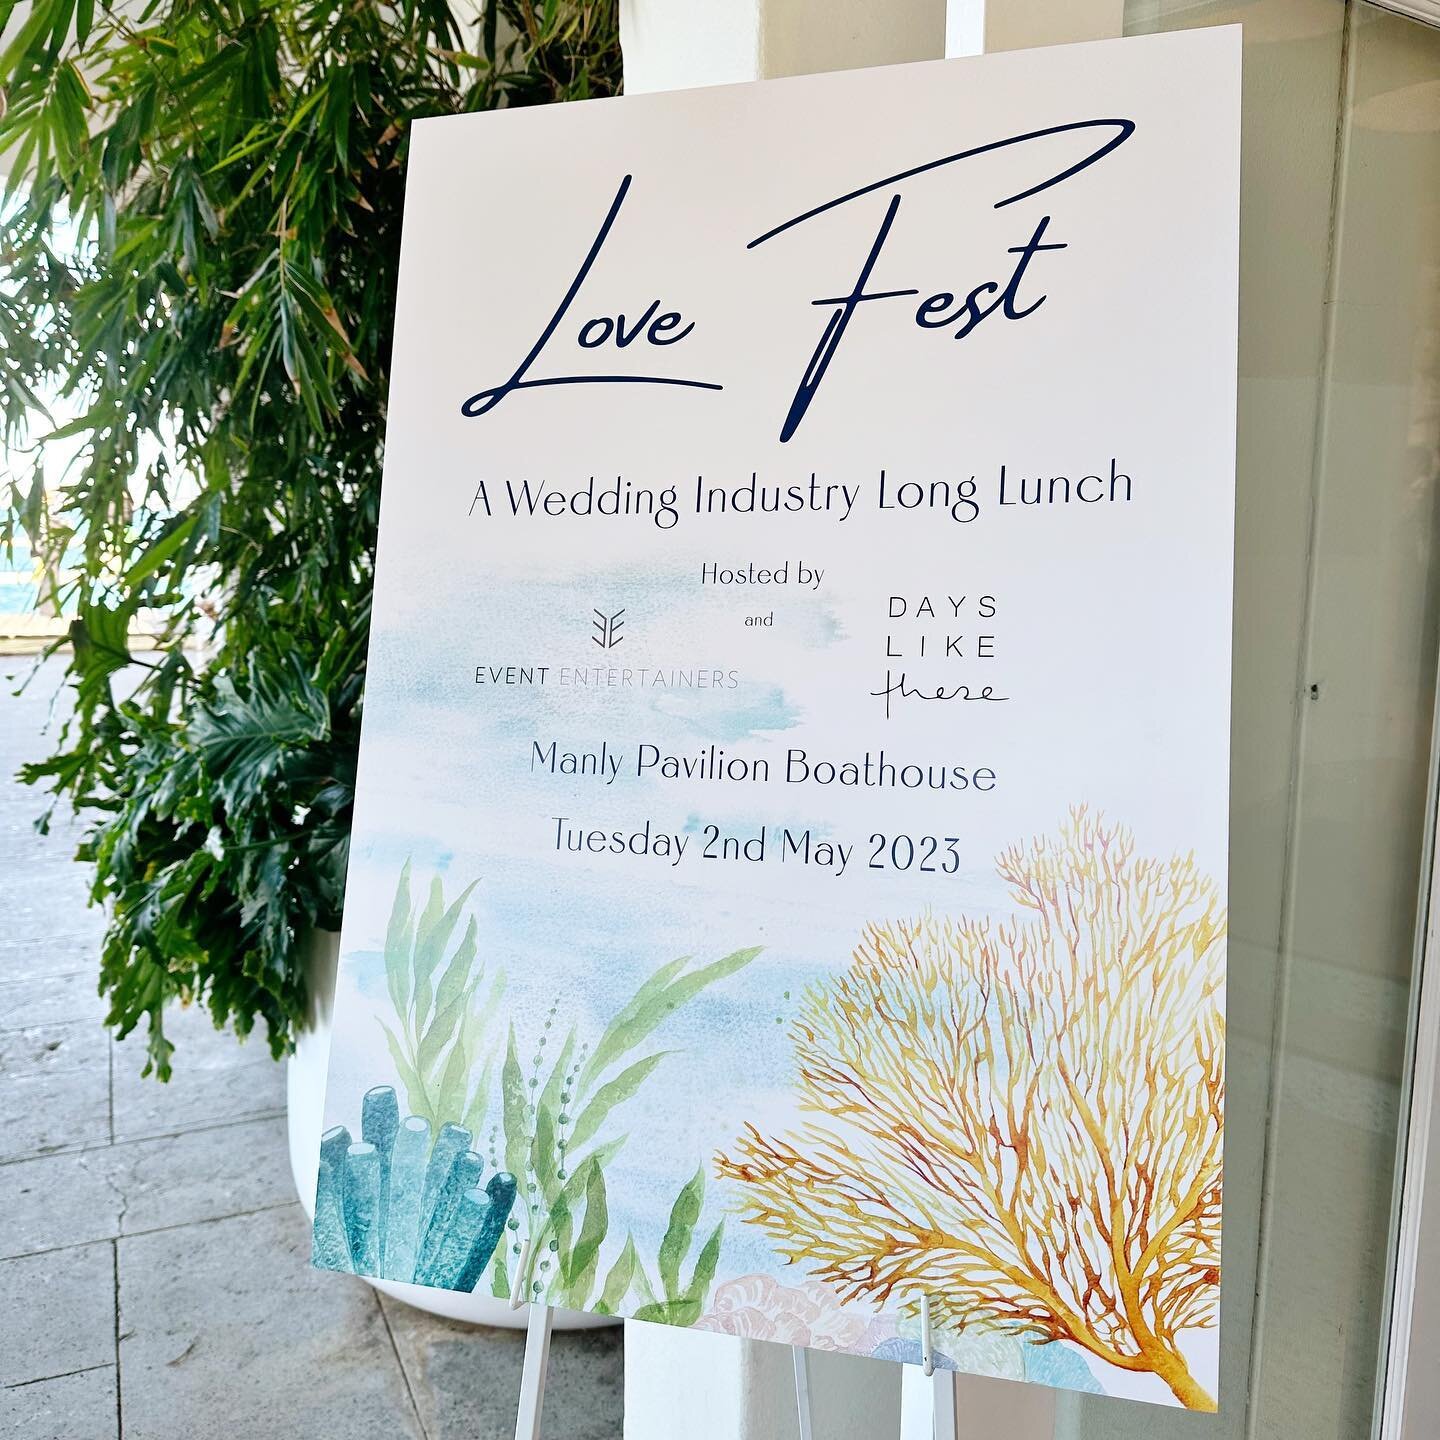 Celebrating today amidst like minded wedding industry professionals at Love Fest Long Lunch at Manly Pavillion.

For this event I&rsquo;ve designed the welcome sign and menus. Taking inspiration from the ocean setting I&rsquo;ve painted a leaf fan co